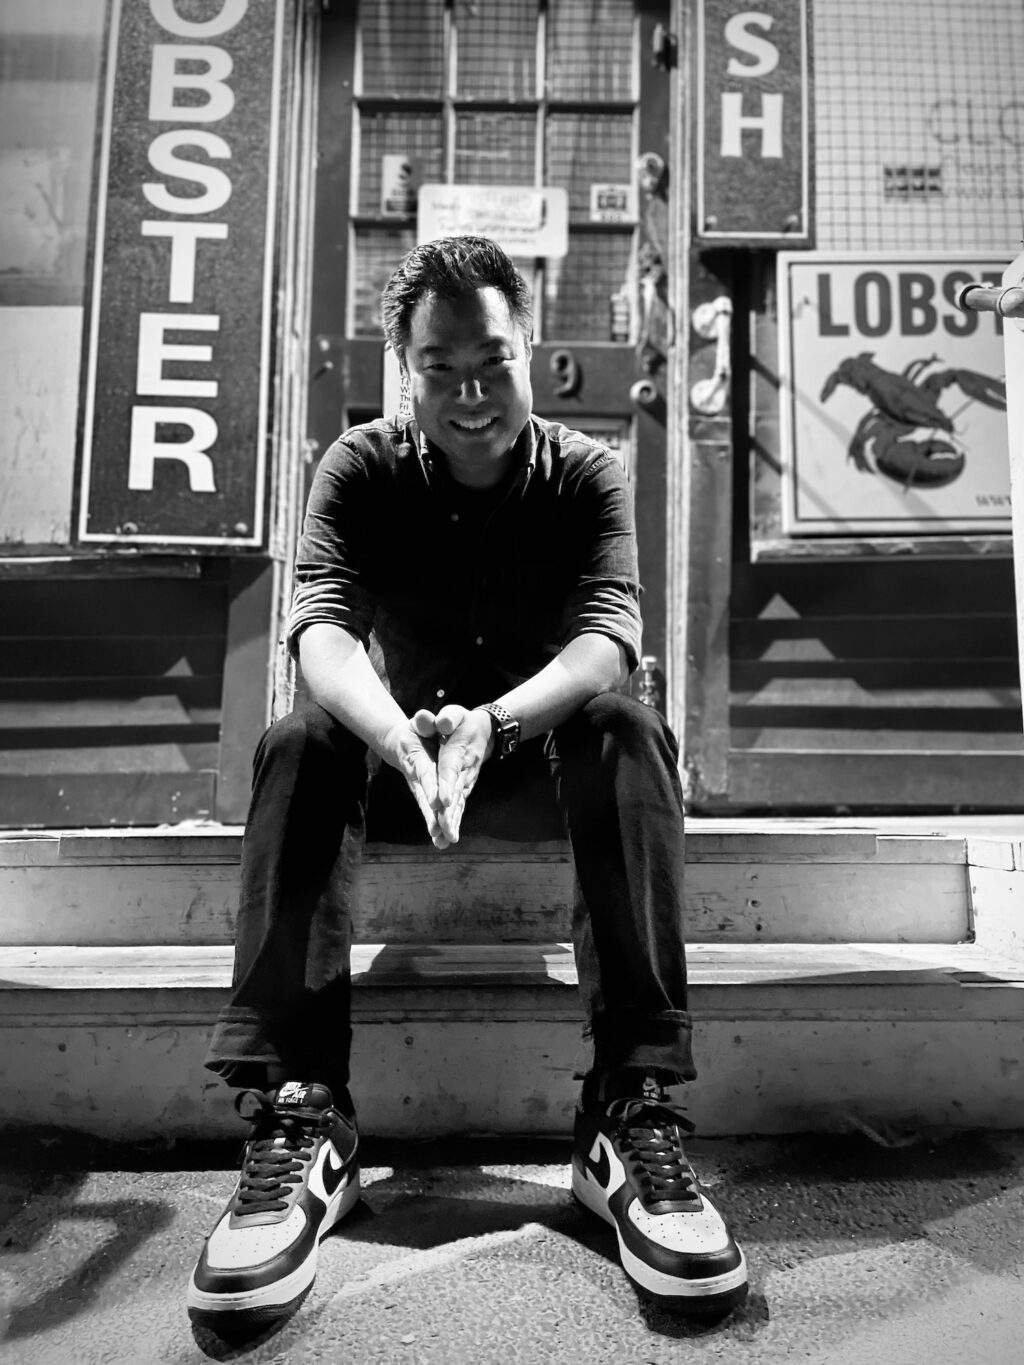 A black and white picture of a man wearing a cuffed shirt, black pants and sneakers sitting down on the steps of a building with signs for lobster outside.